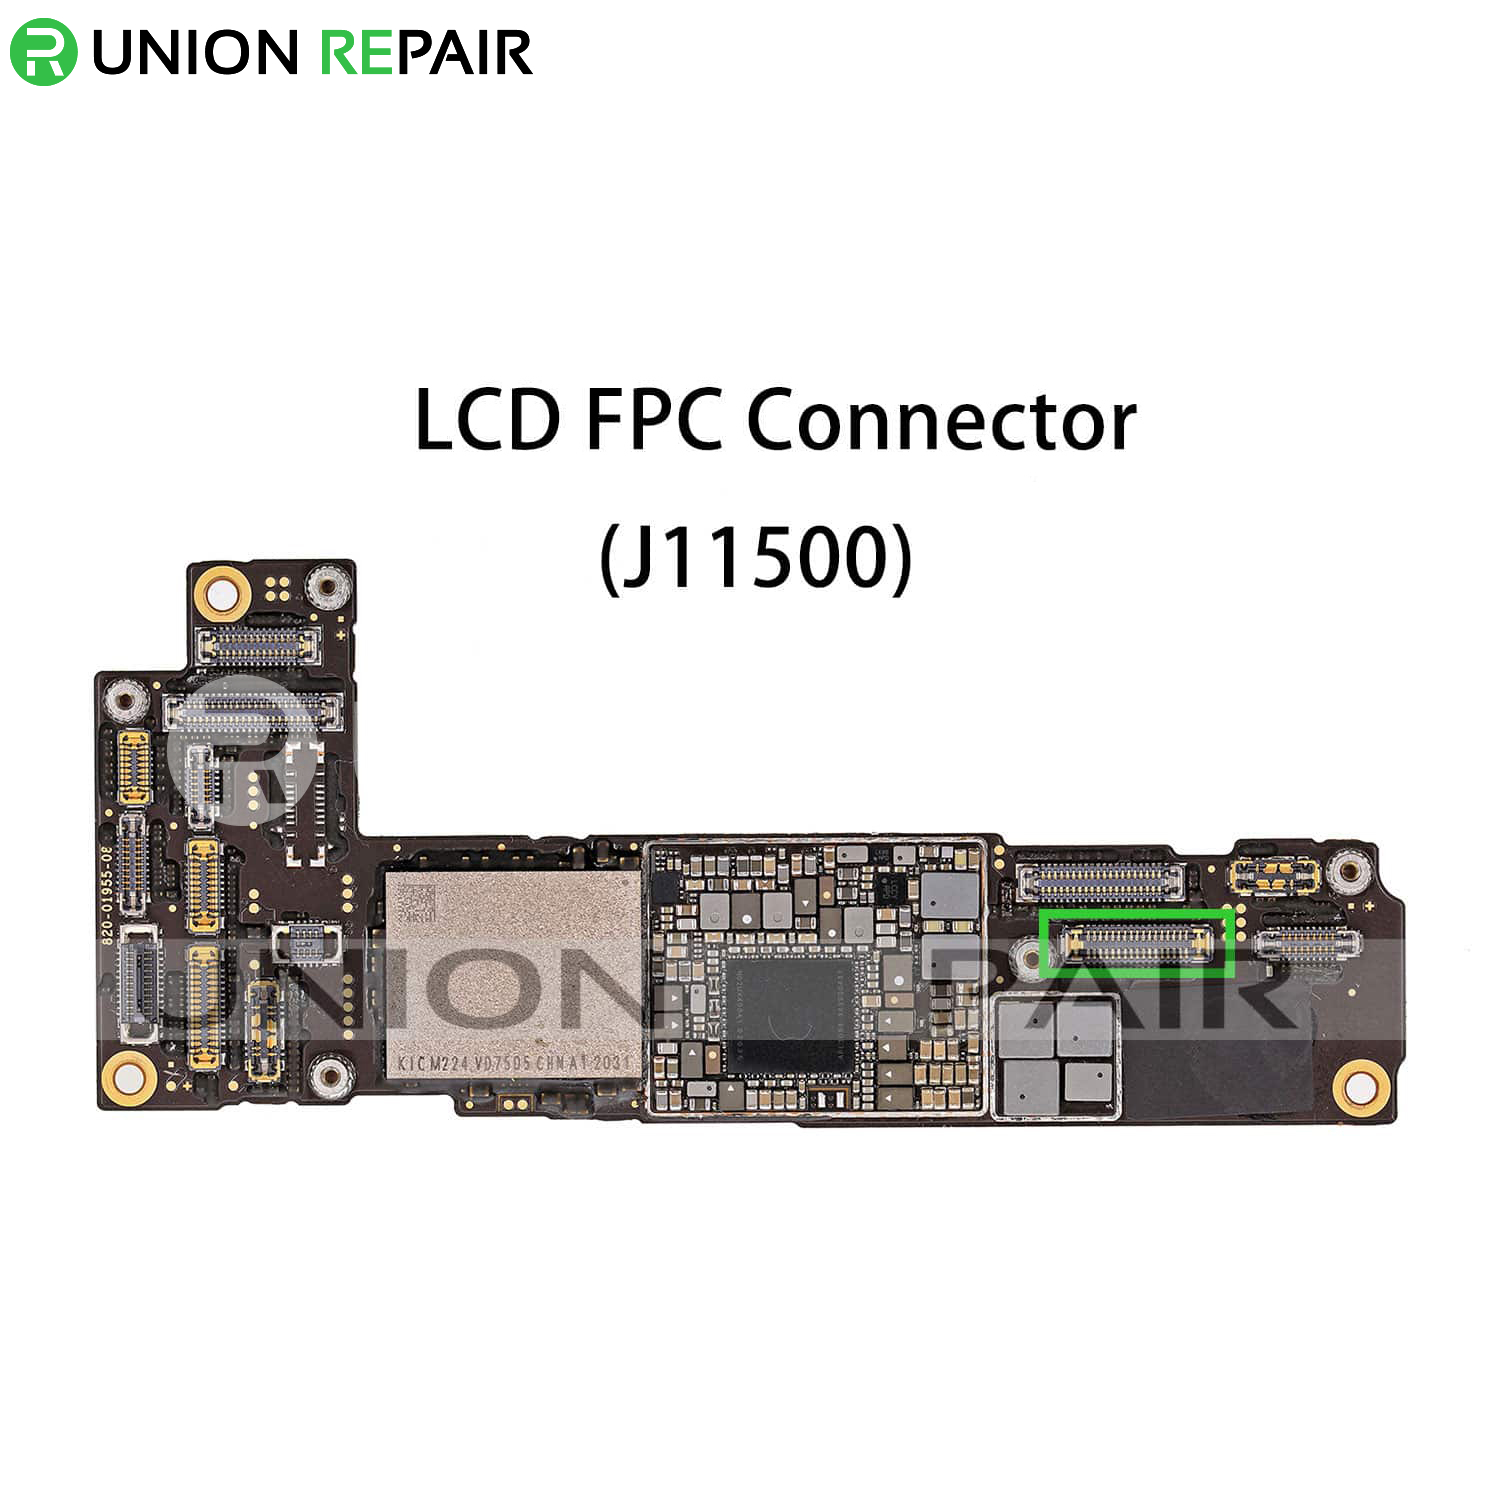  Replacement for iPhone 12/12 Pro LCD Connector Port Onboard, fig. 1 